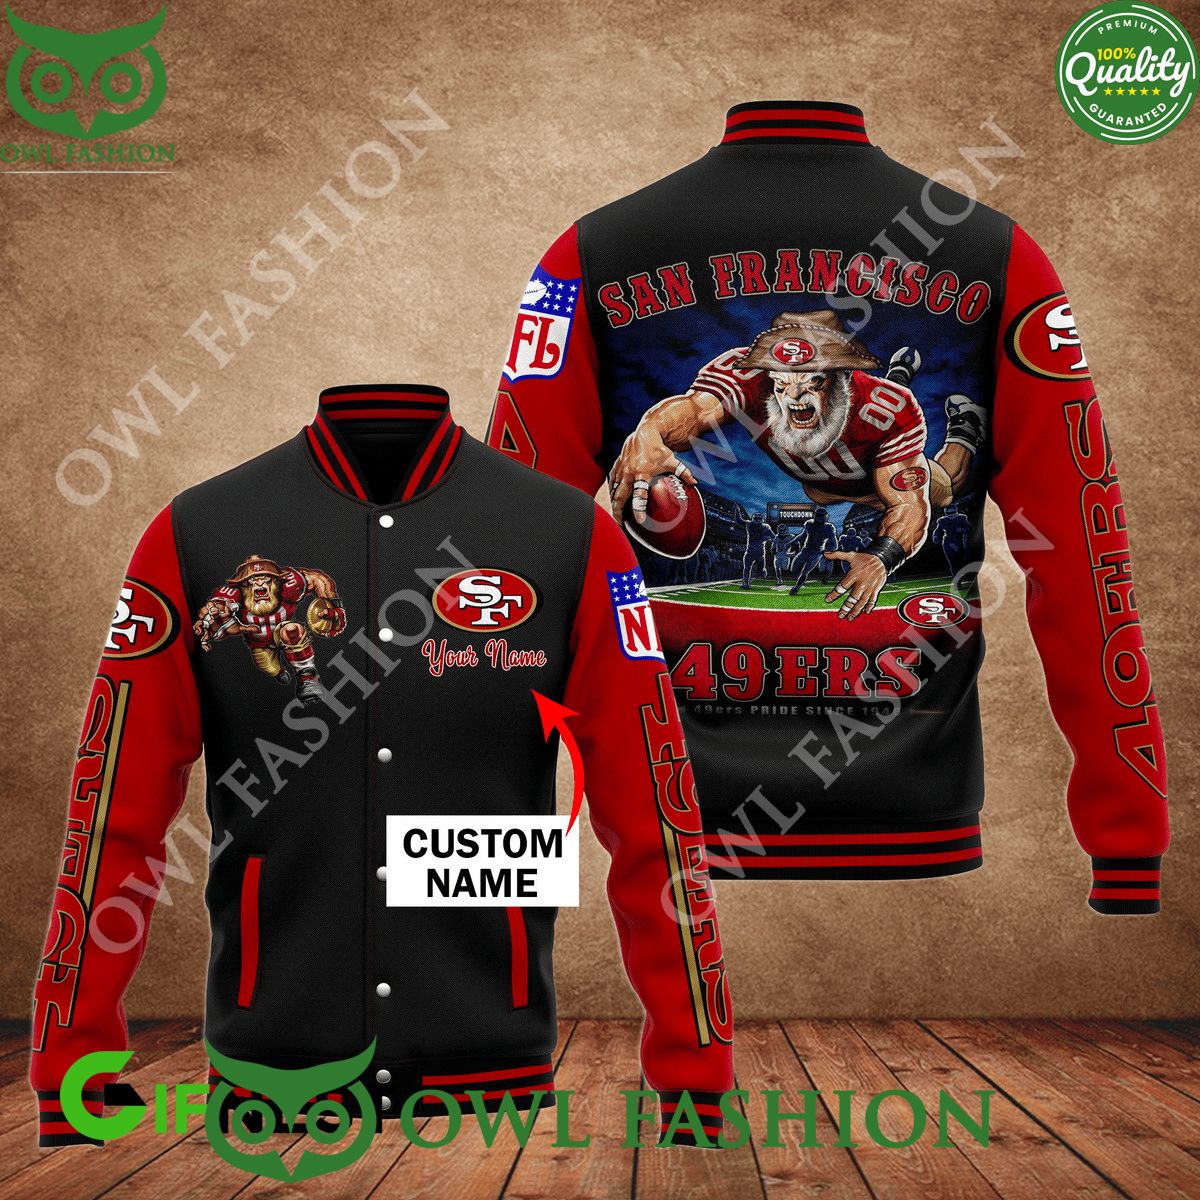 Personalized SF49 Mascot NFC West Champions Varsity Jacket